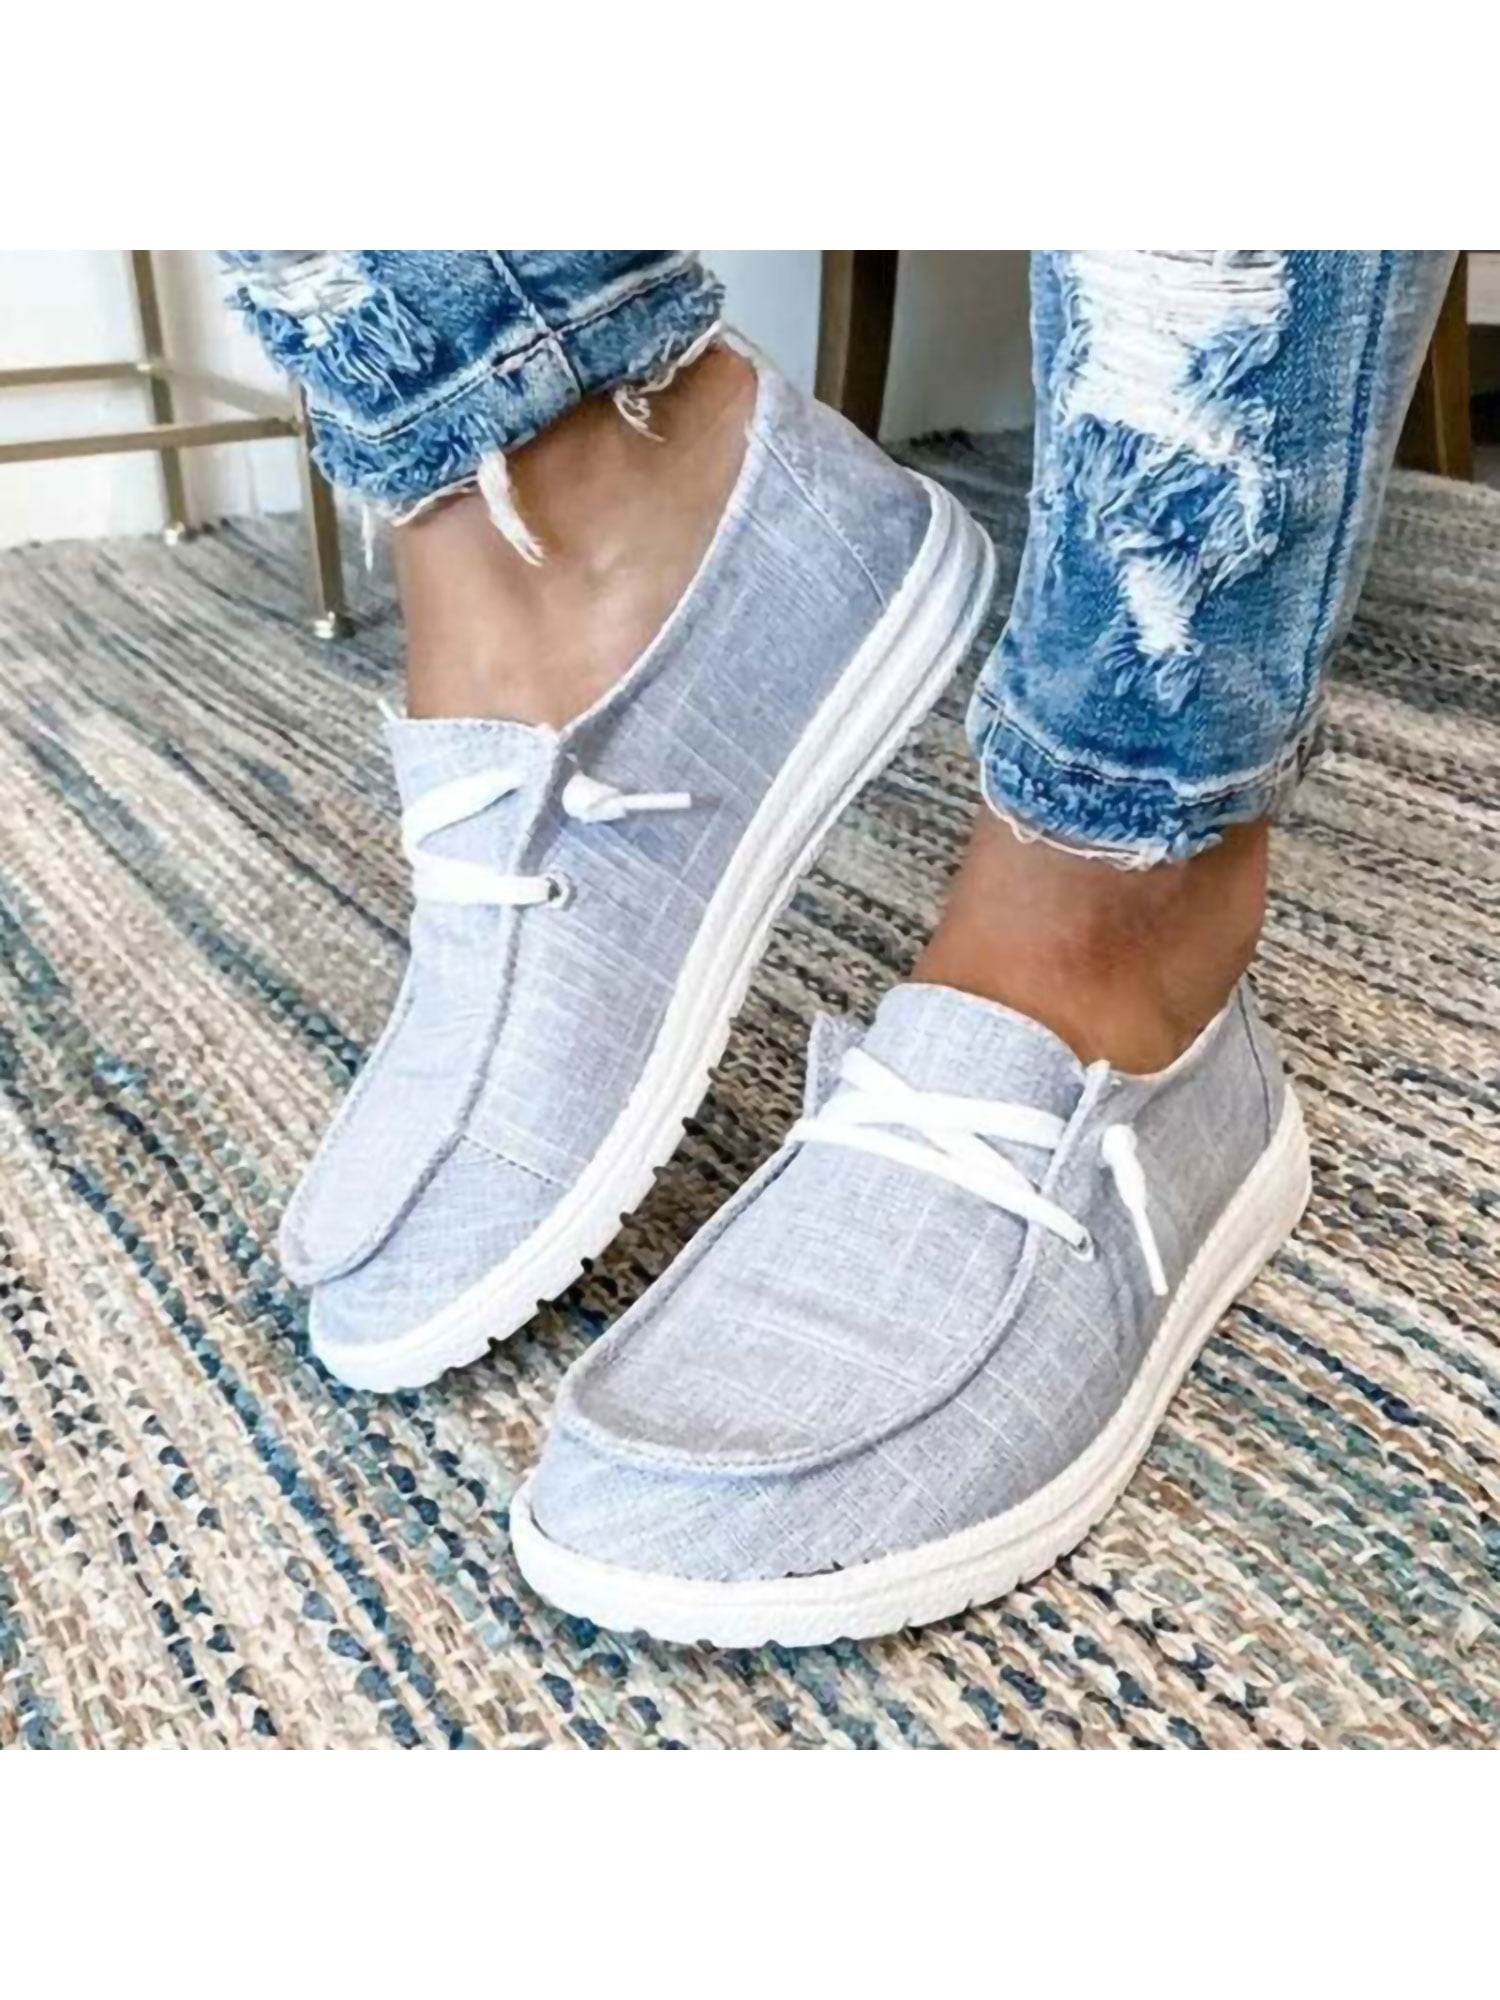 Womens Slip on Shoes Canvas Loafers Fashion Casual Sneakers